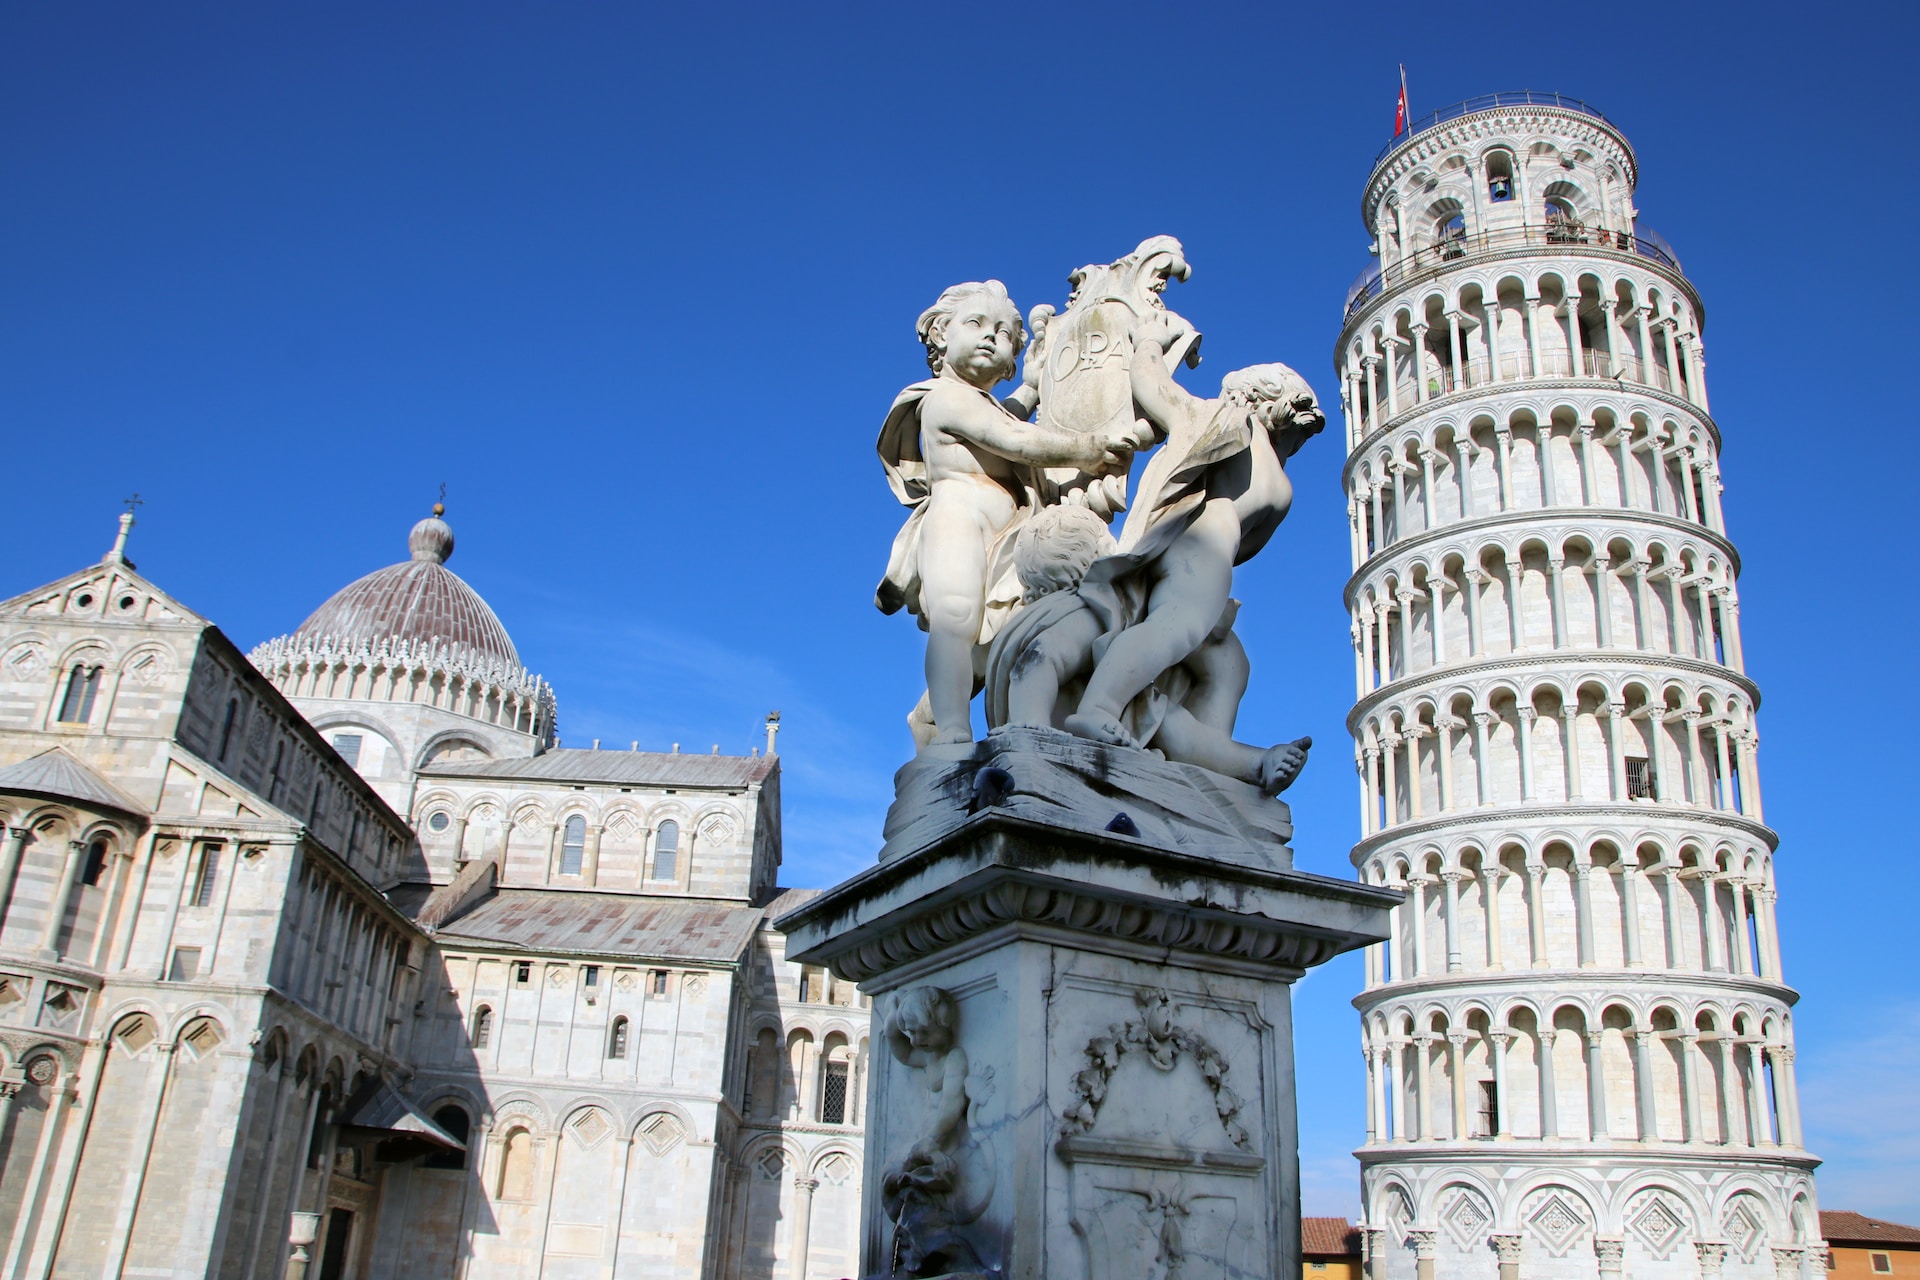 http://www.theculturemap.com/wp-content/uploads/2012/06/leaning-tower-pisa-blog-guide.jpg